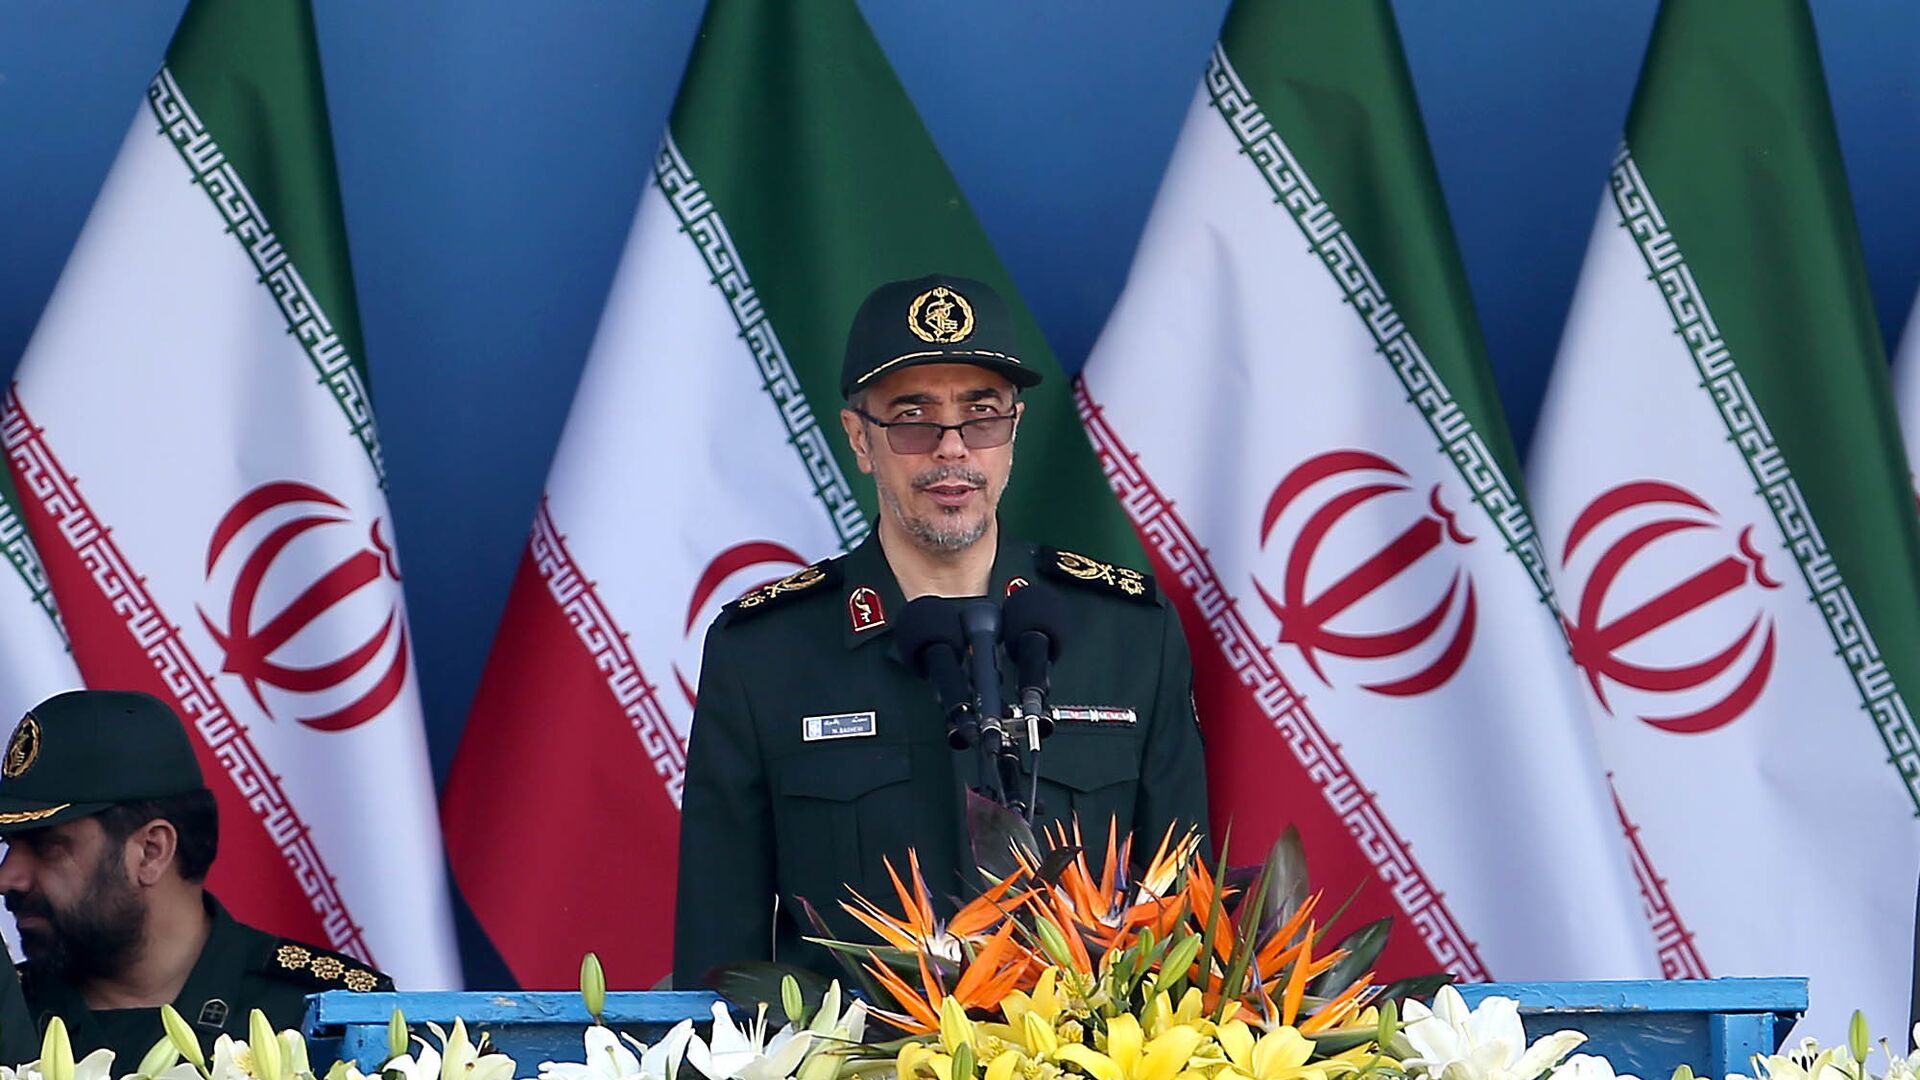 Chief of the General Staff of Iran's Armed Forces, General Mohammad Hossein Bagheri delivers a speech during a military parade marking the 36th anniversary of Iraq's 1980 invasion of Iran, in front of the shrine of late revolutionary founder Ayatollah Khomeini, just outside Tehran, Iran, Wednesday, Sept. 21, 2016 - Sputnik International, 1920, 27.04.2022